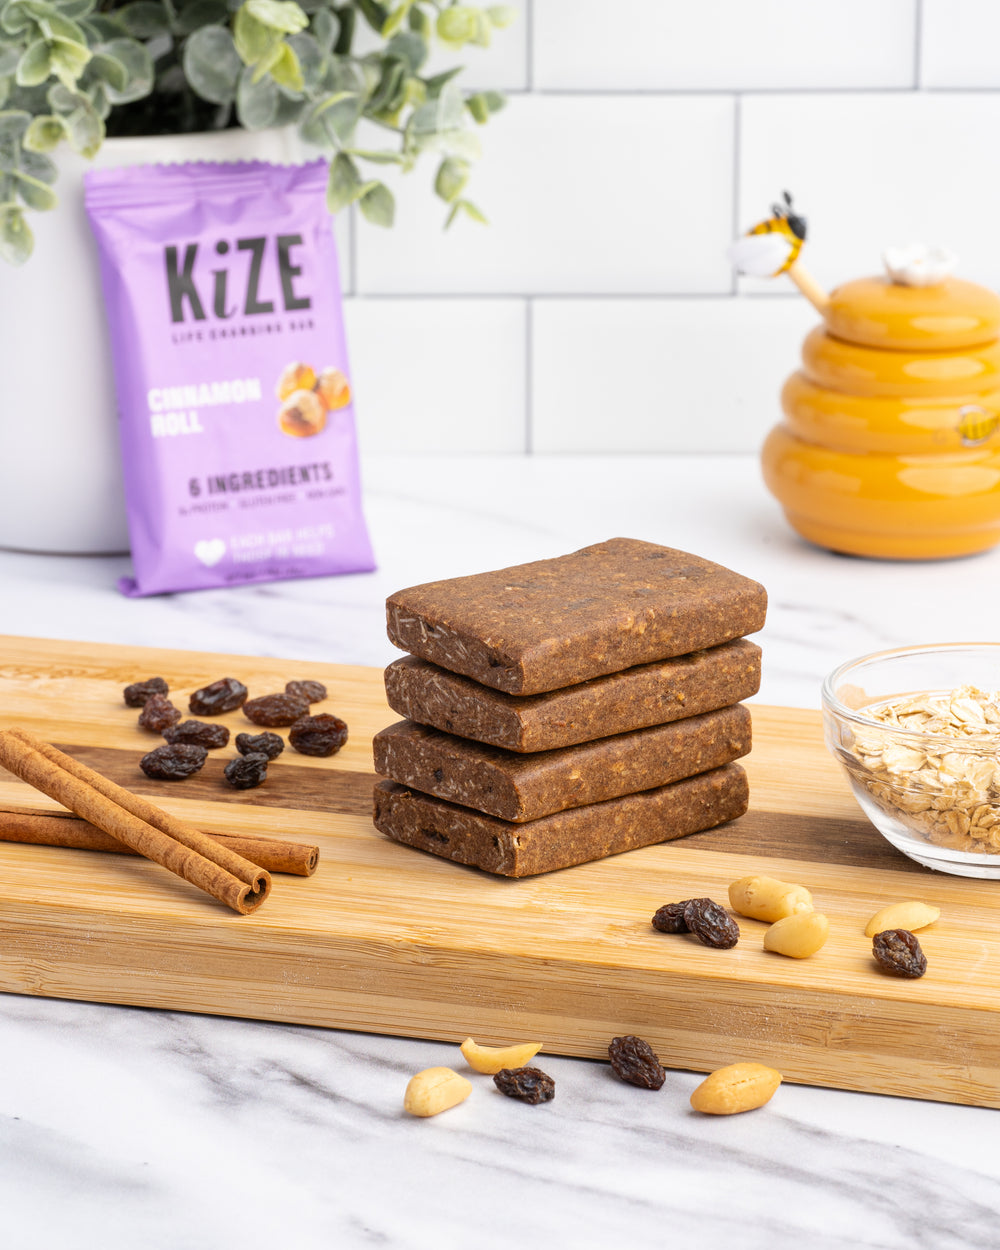 Kize Cinnamon Roll Protein Bars Stacked on Kitchen Counter